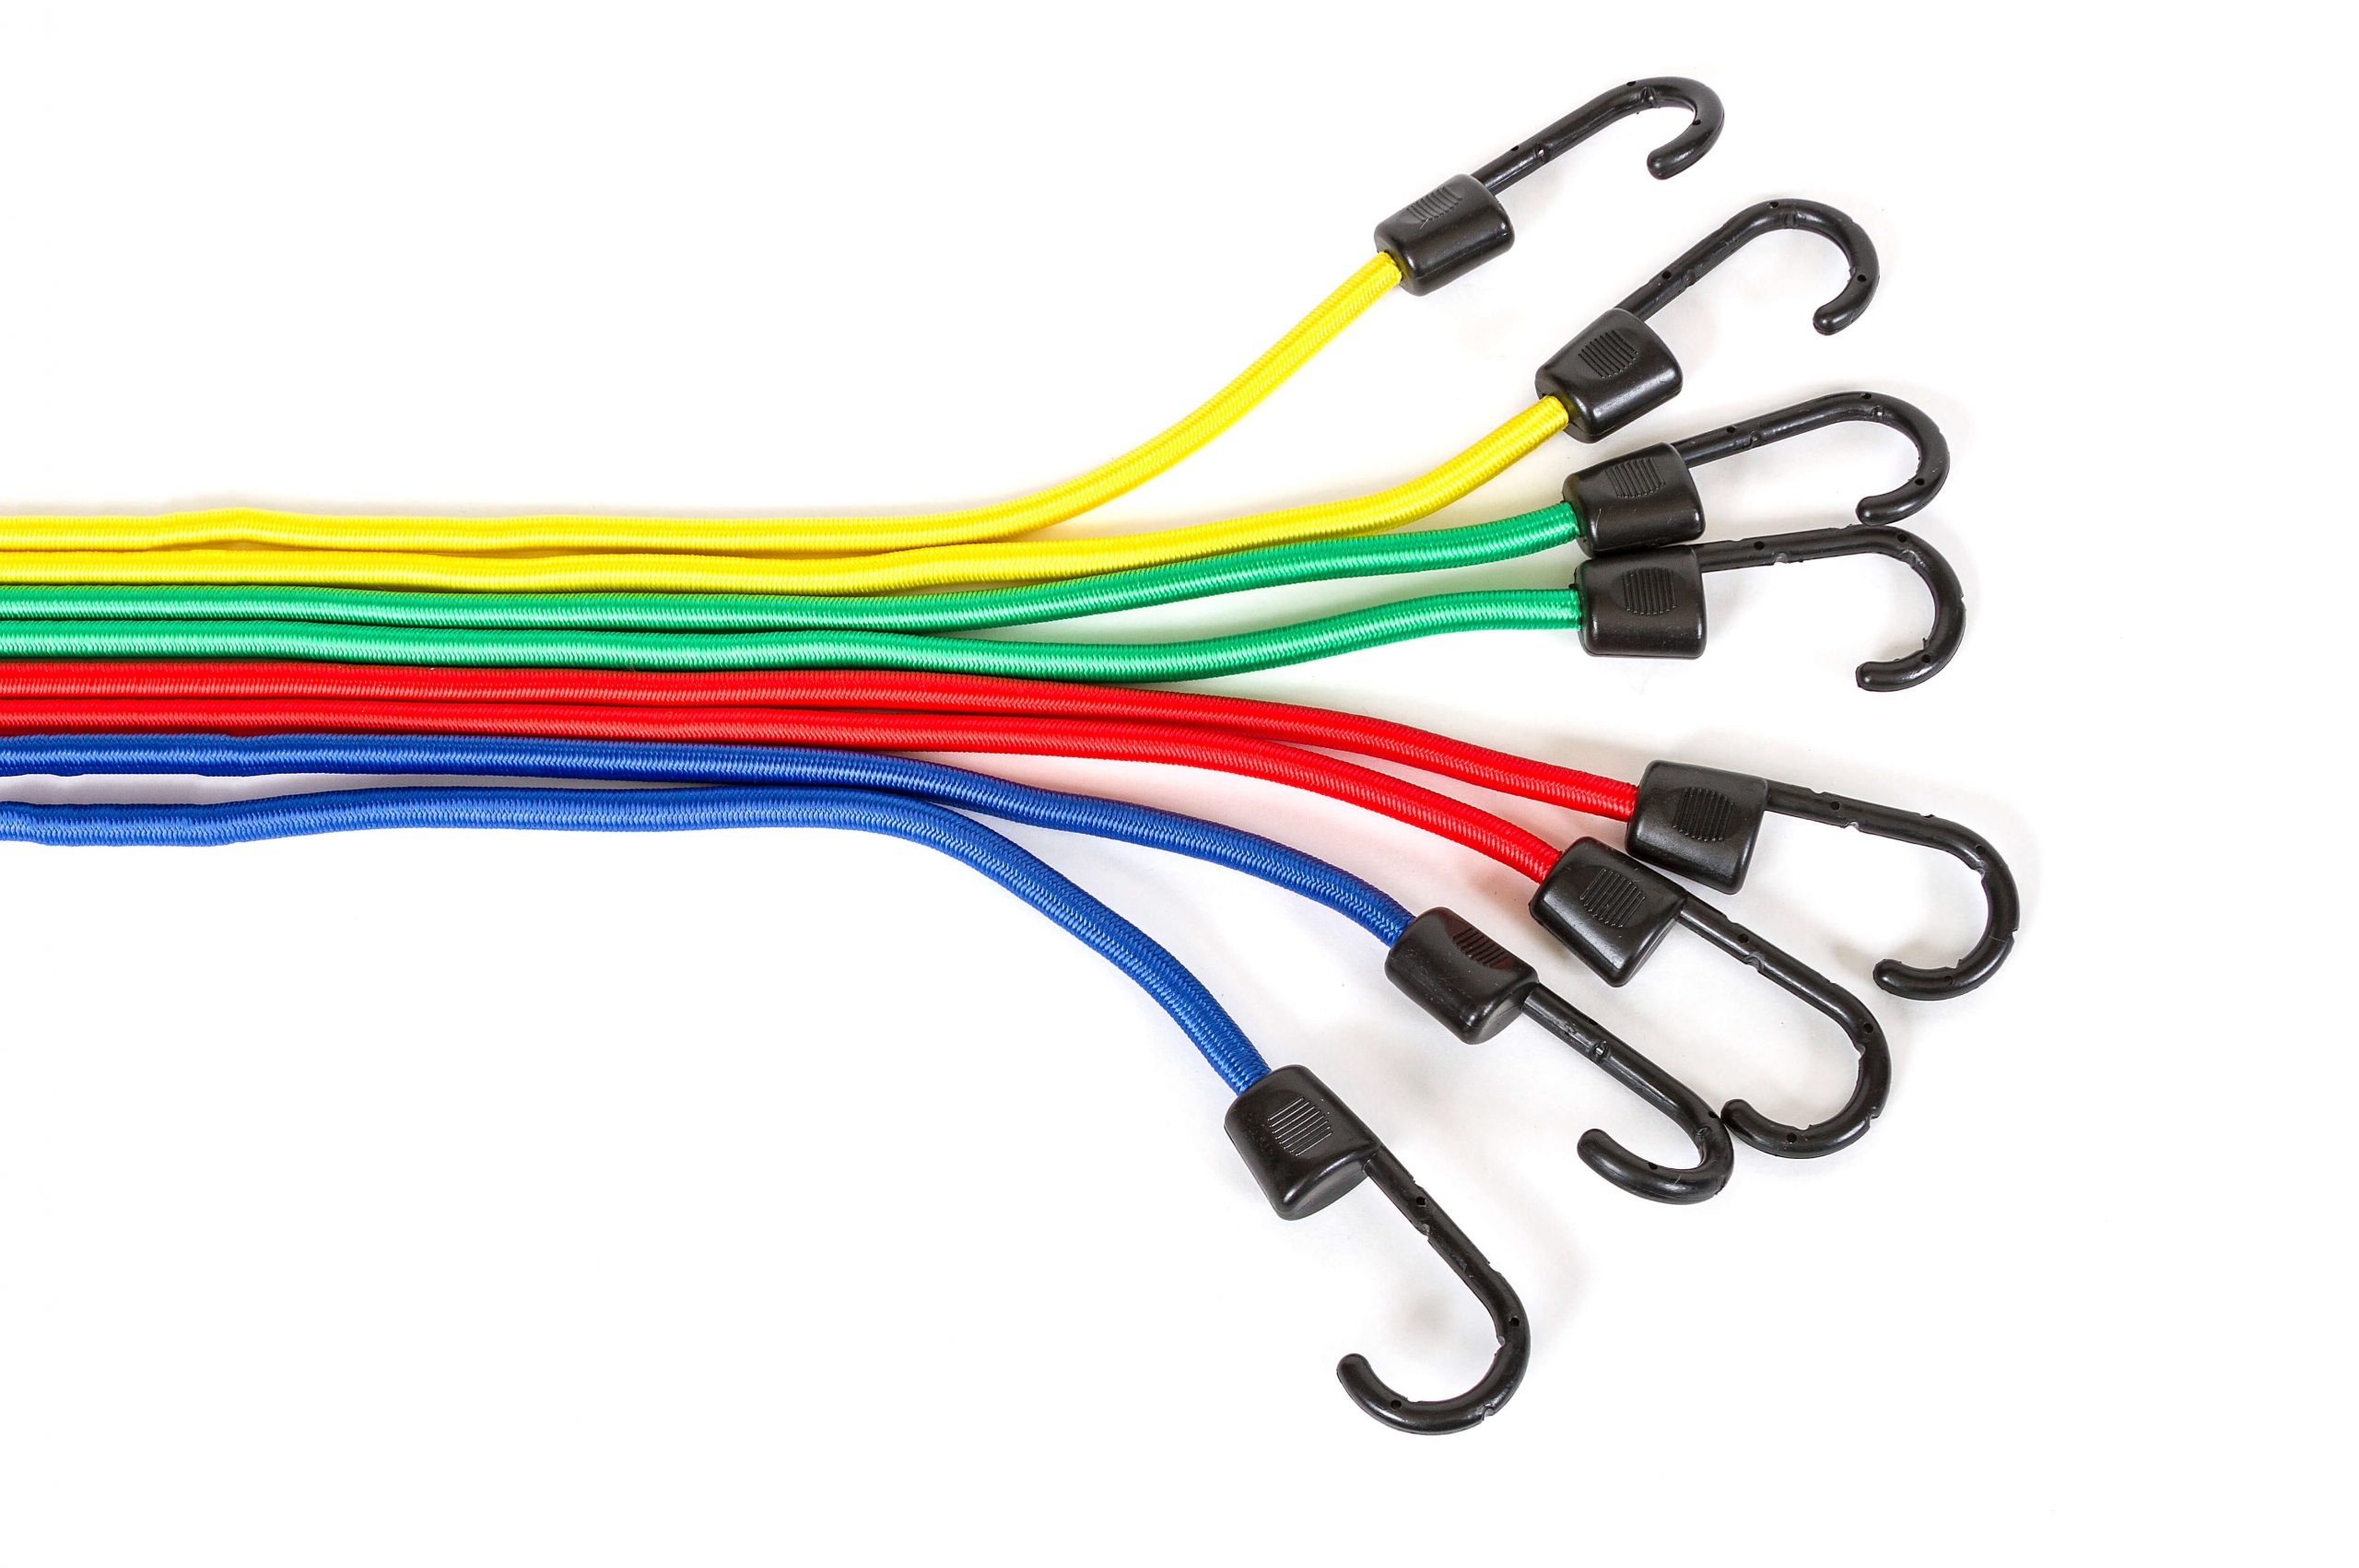 Four different color bungee cords